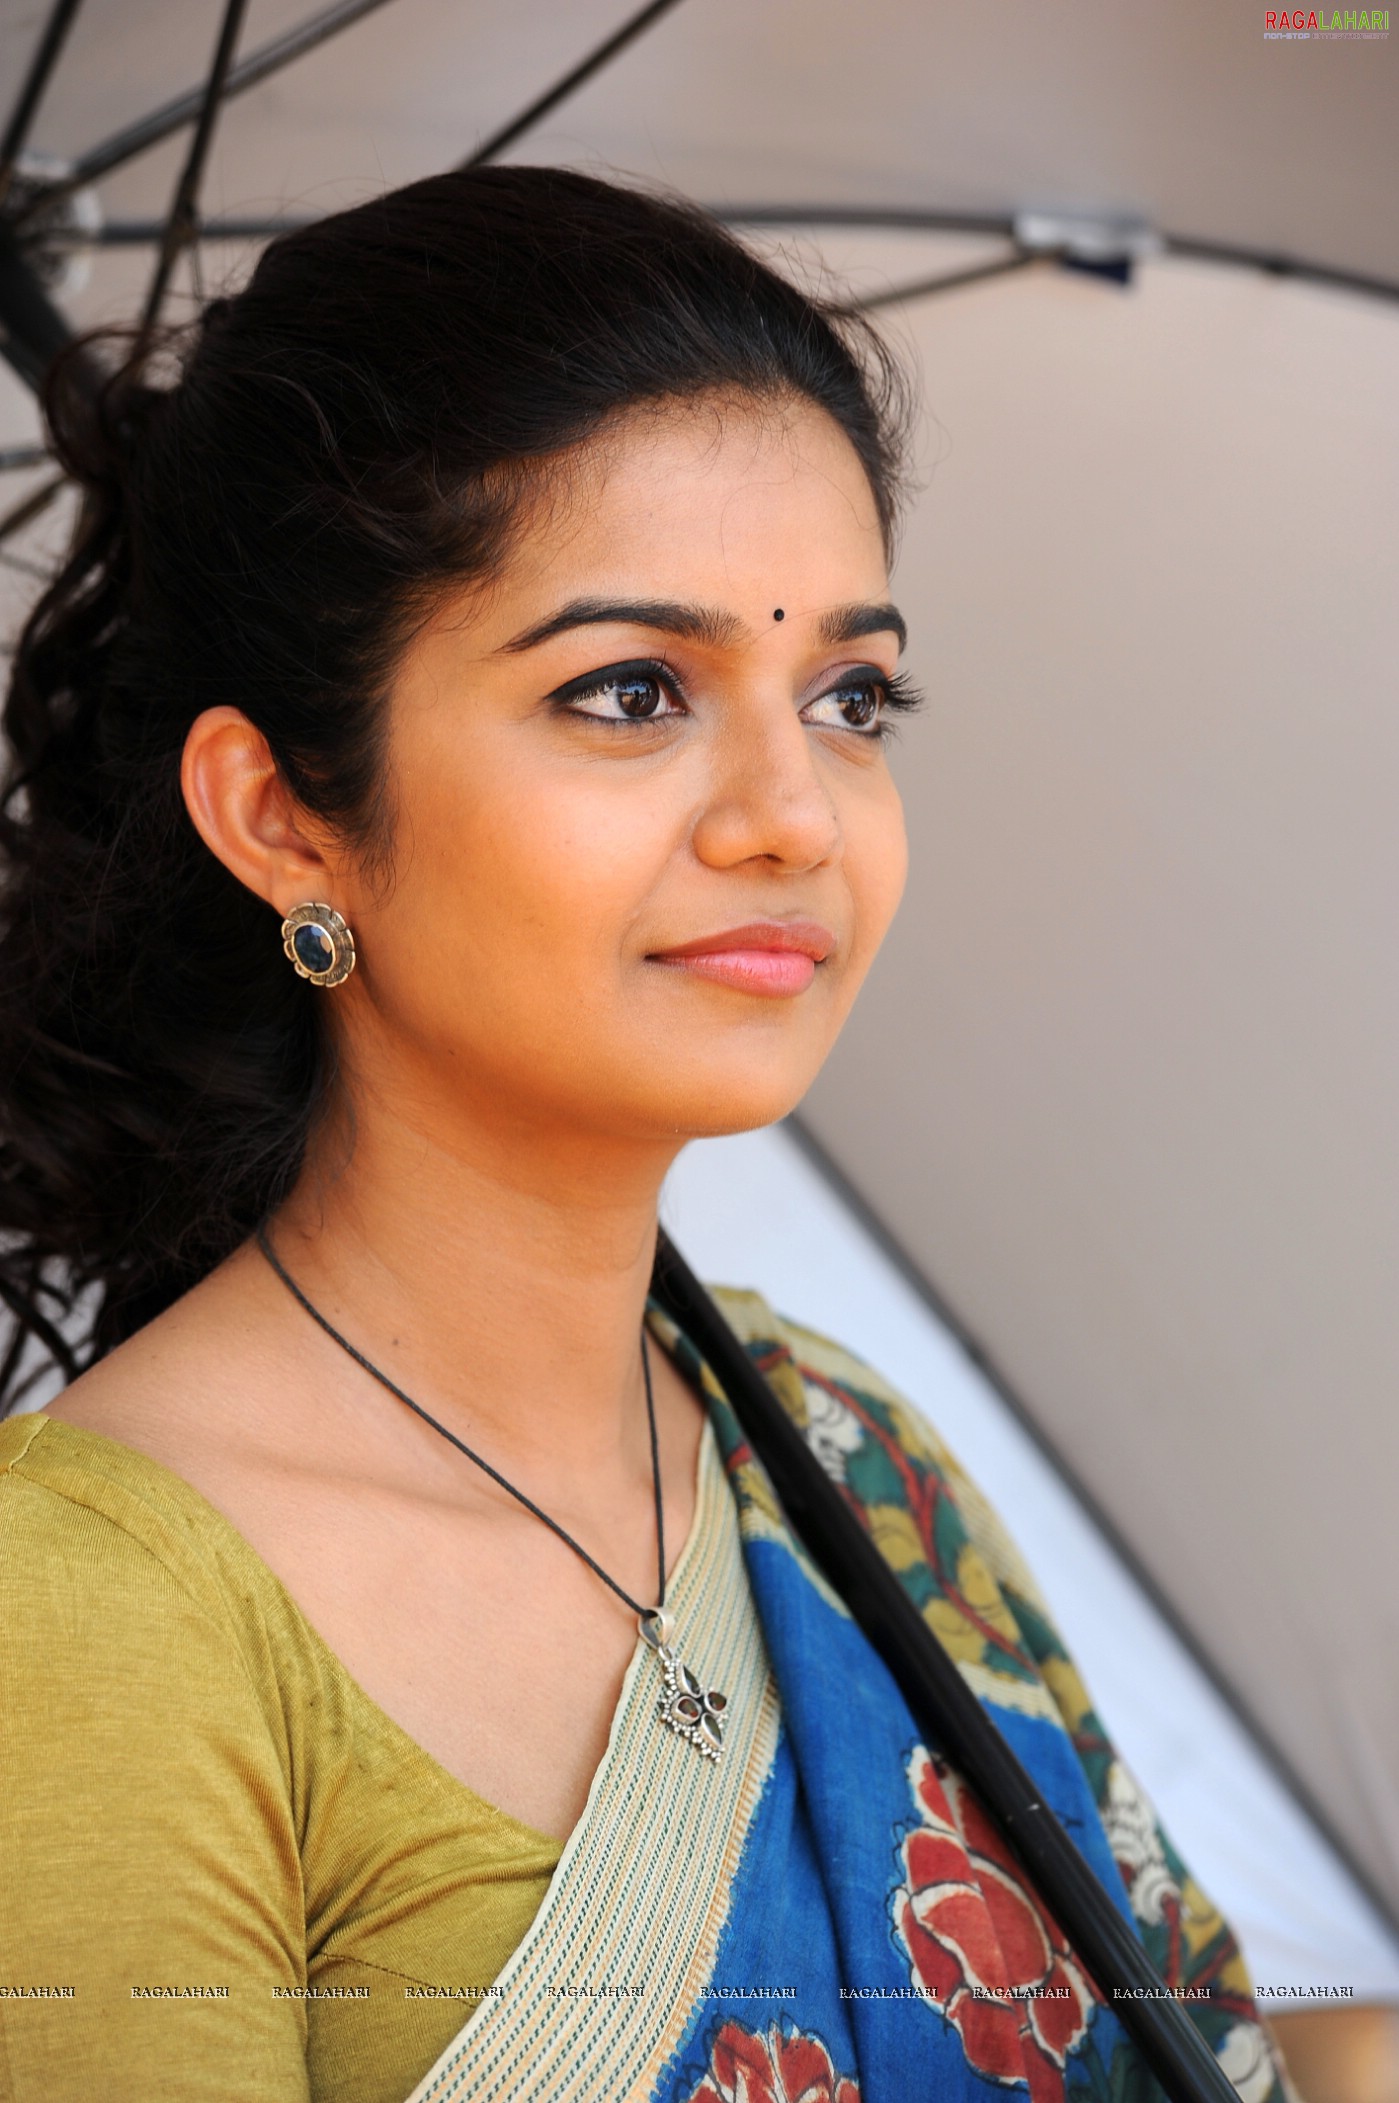 Colors Swathi (Posters)